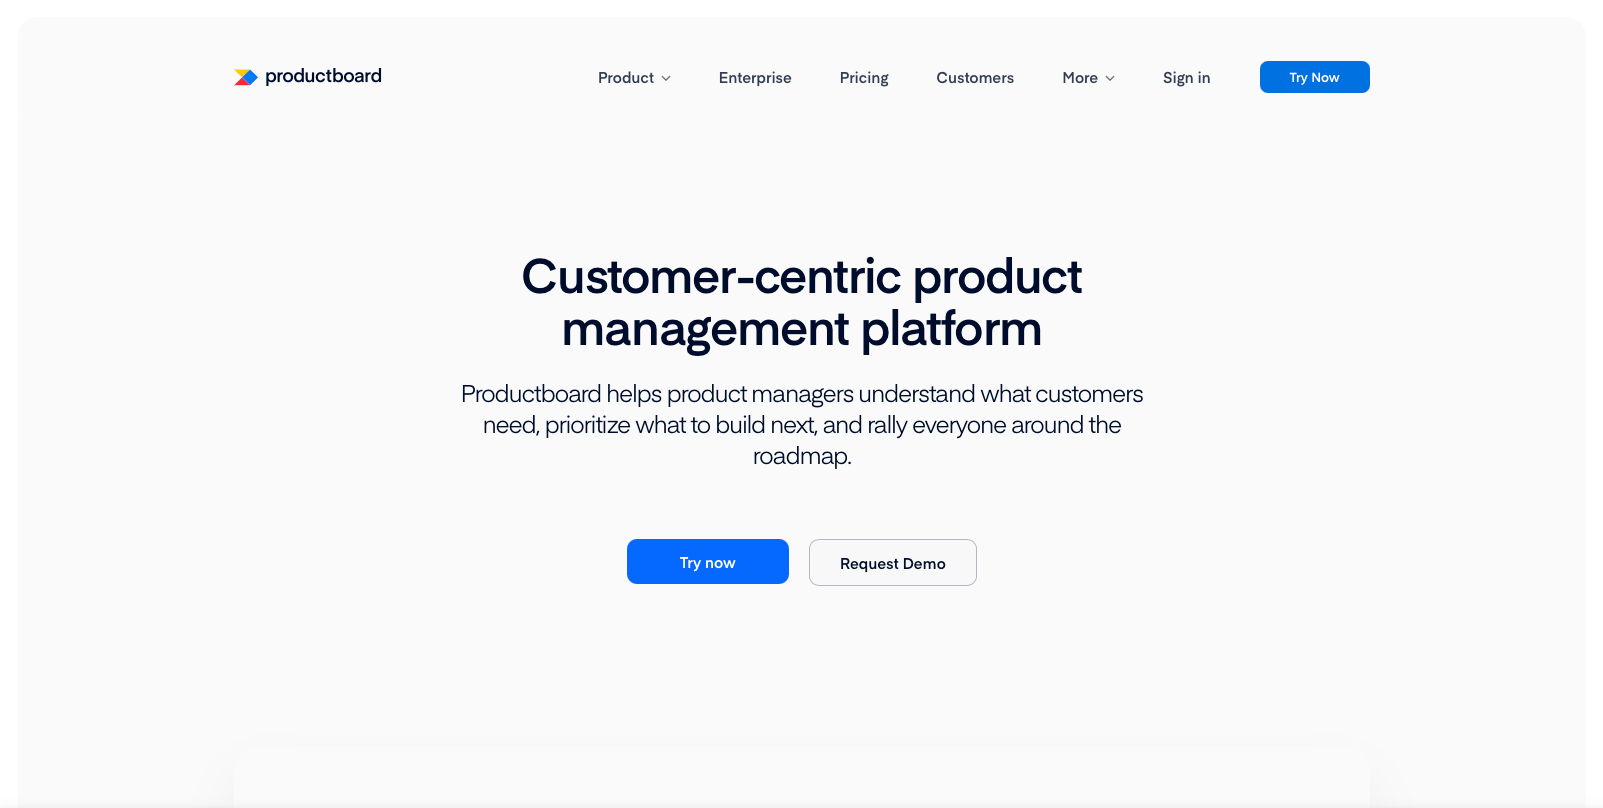 productboard-feature-voting-tool